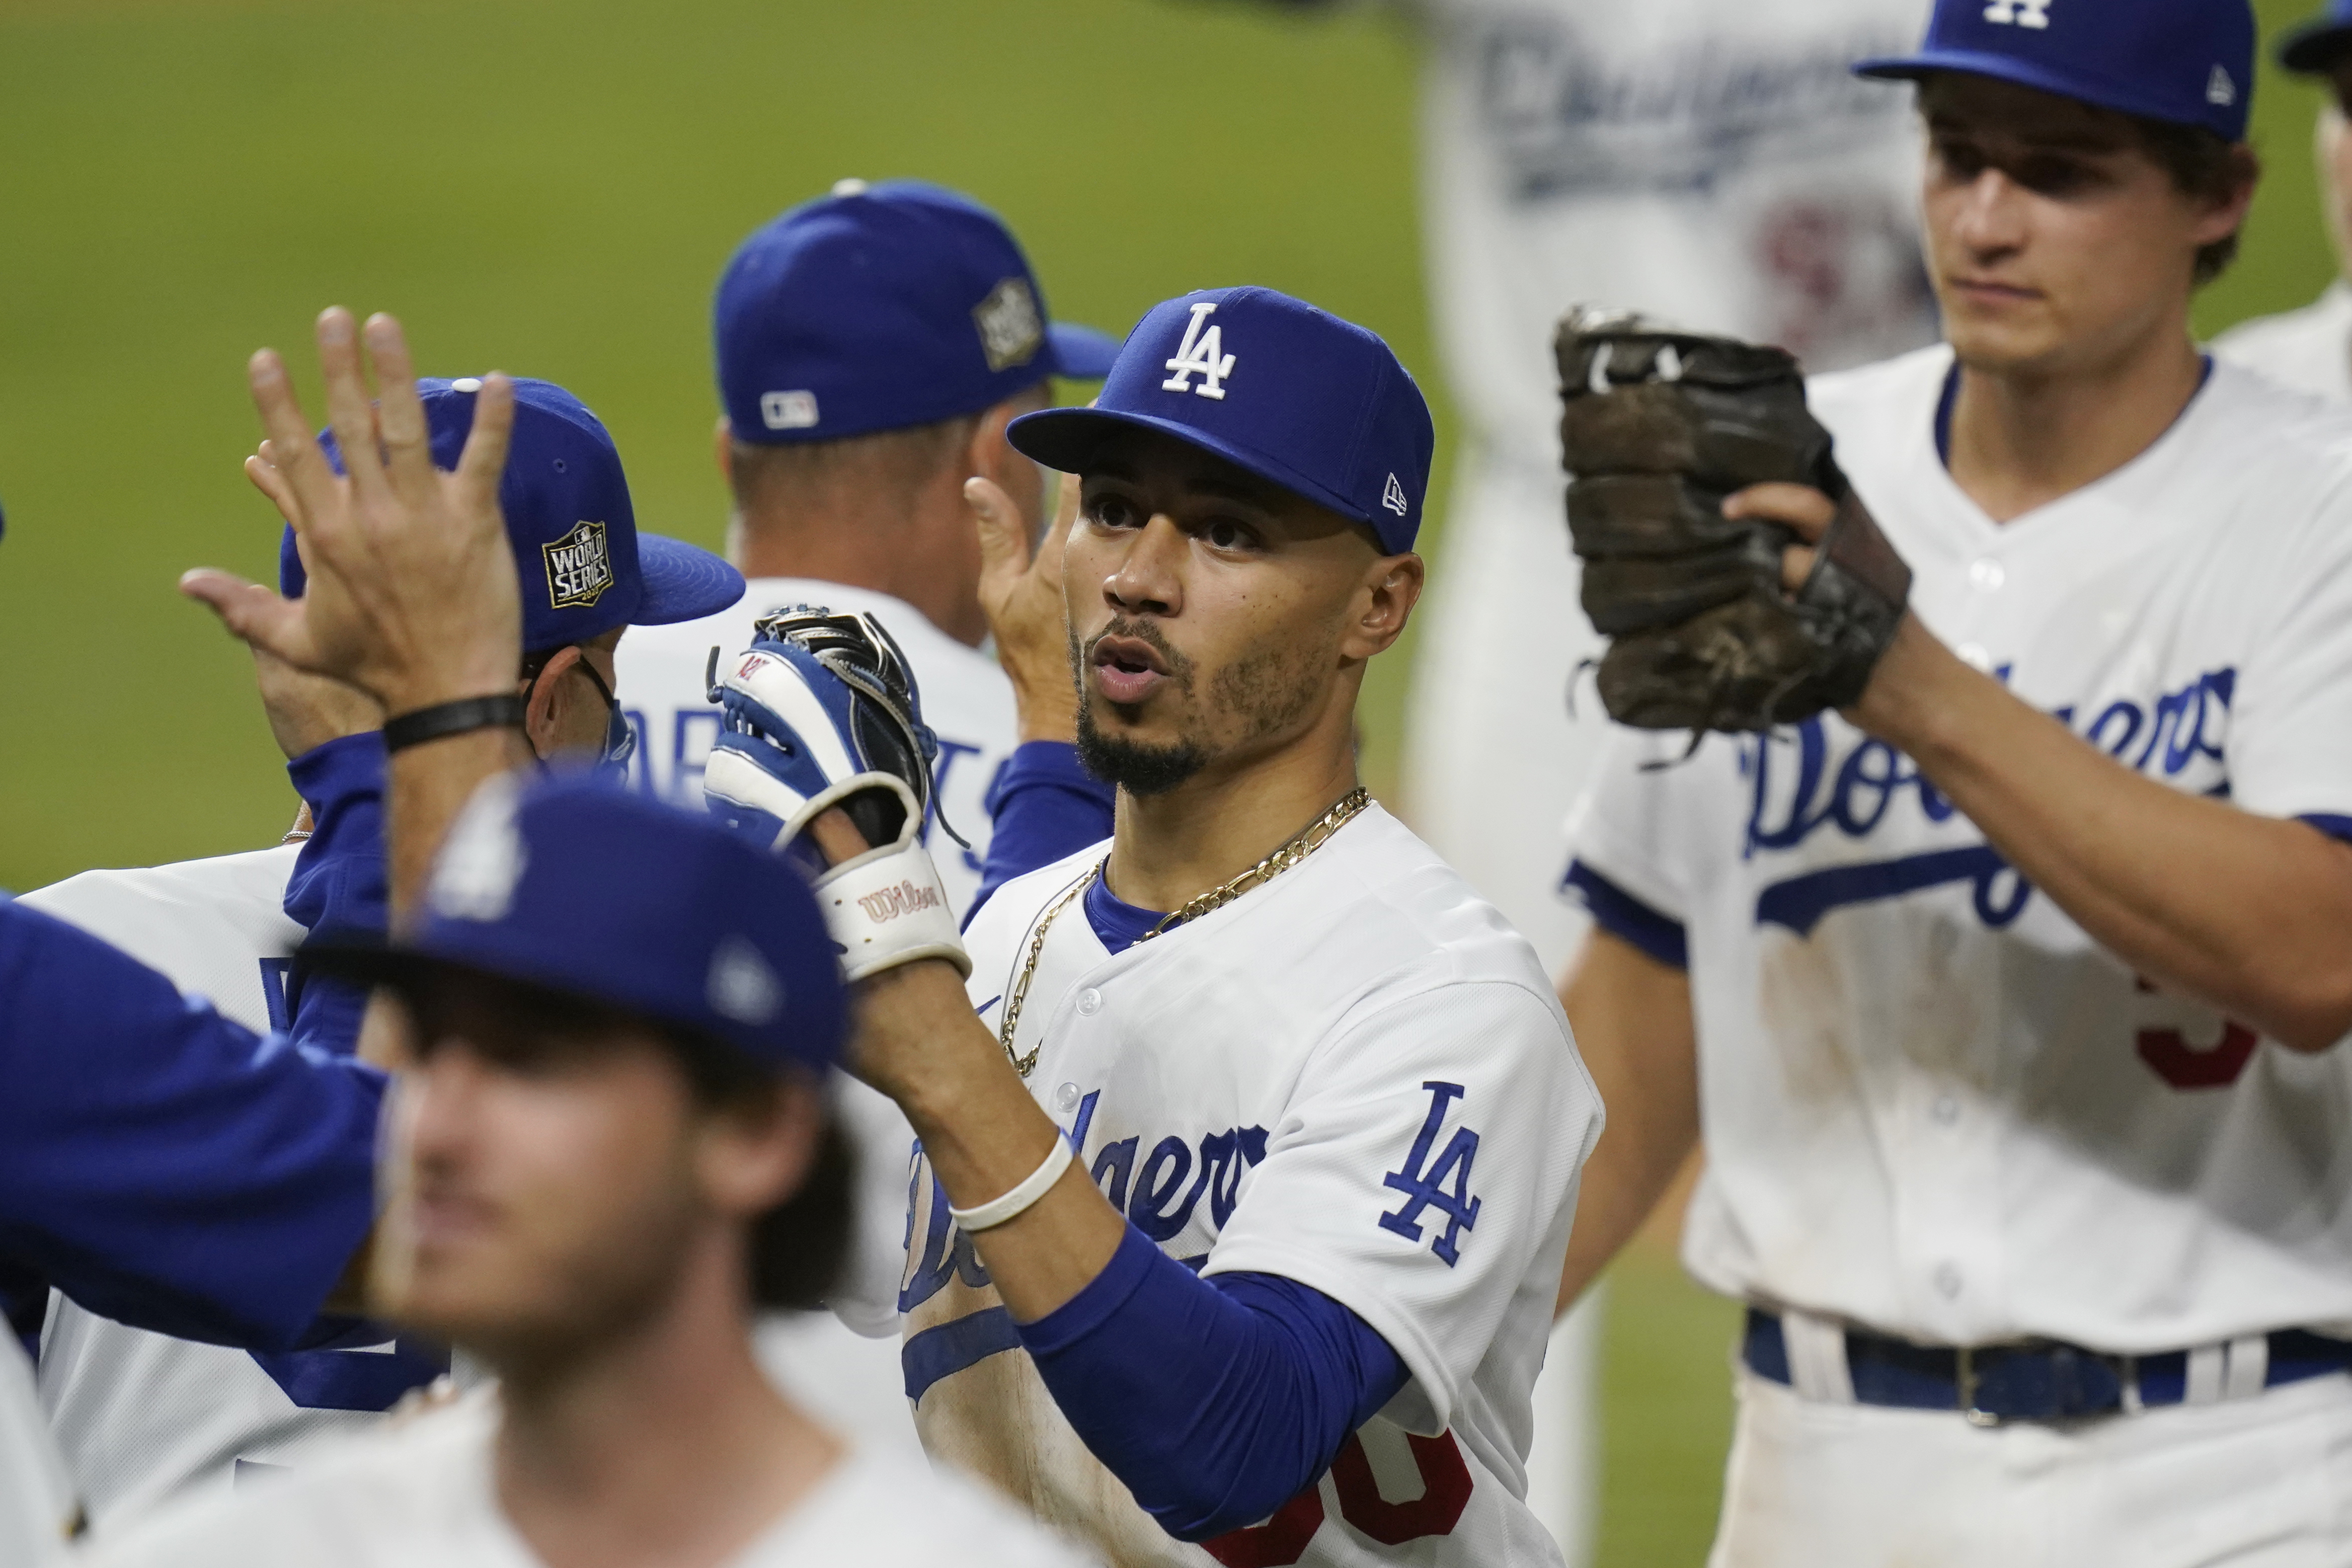 No mistake about it: Behind Mookie Betts and Clayton Kershaw, the Dodgers  look unstoppable - The Boston Globe